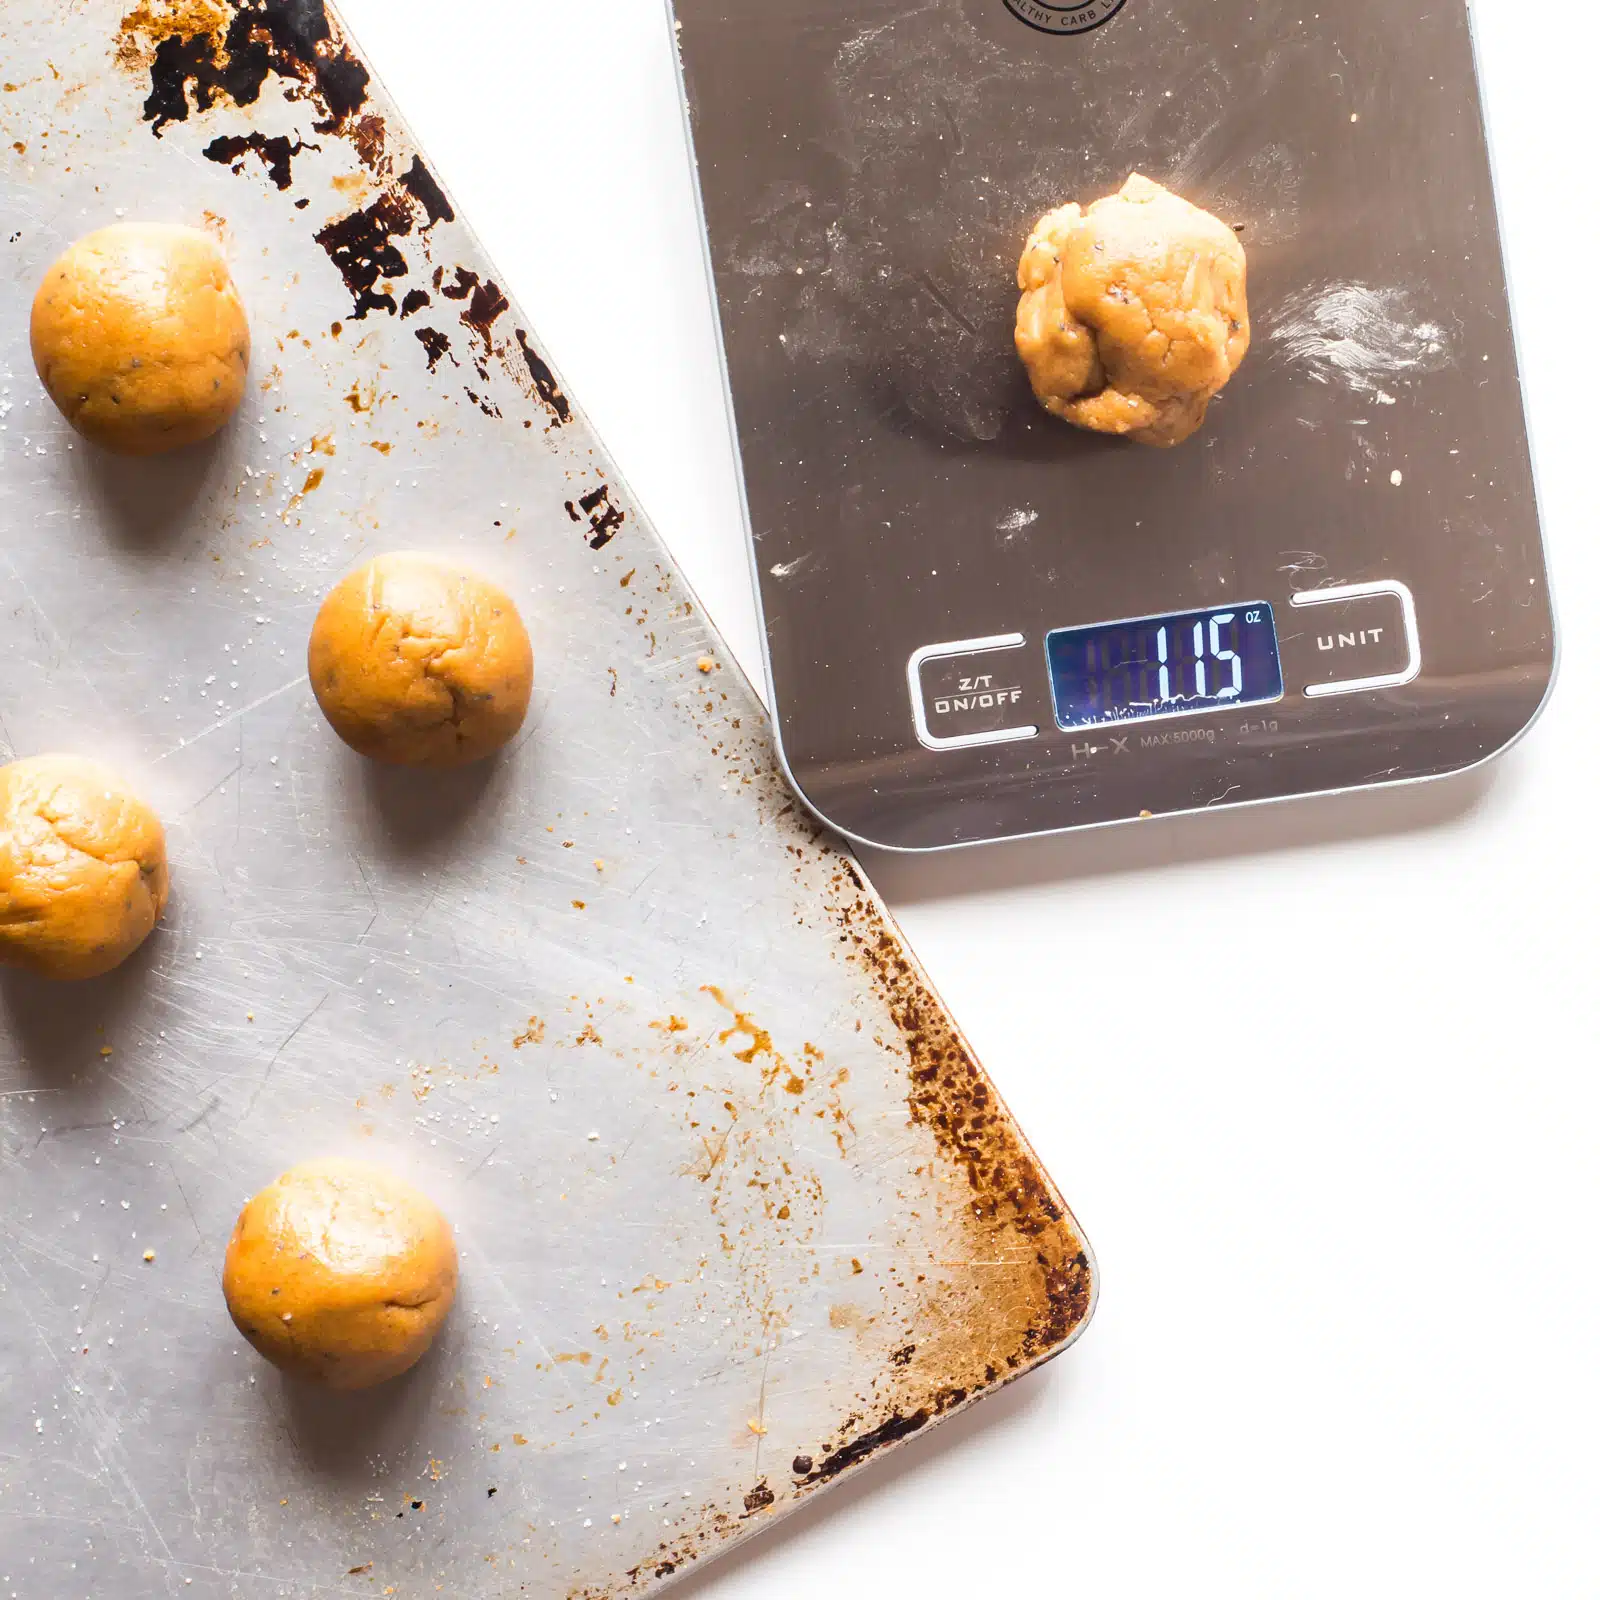 The cookie dough for these vegan peanut butter balls sit on a baking pan. A pinch of the dough is sitting on a kitchen measuring tool to help weight cookies to make them equally sized.